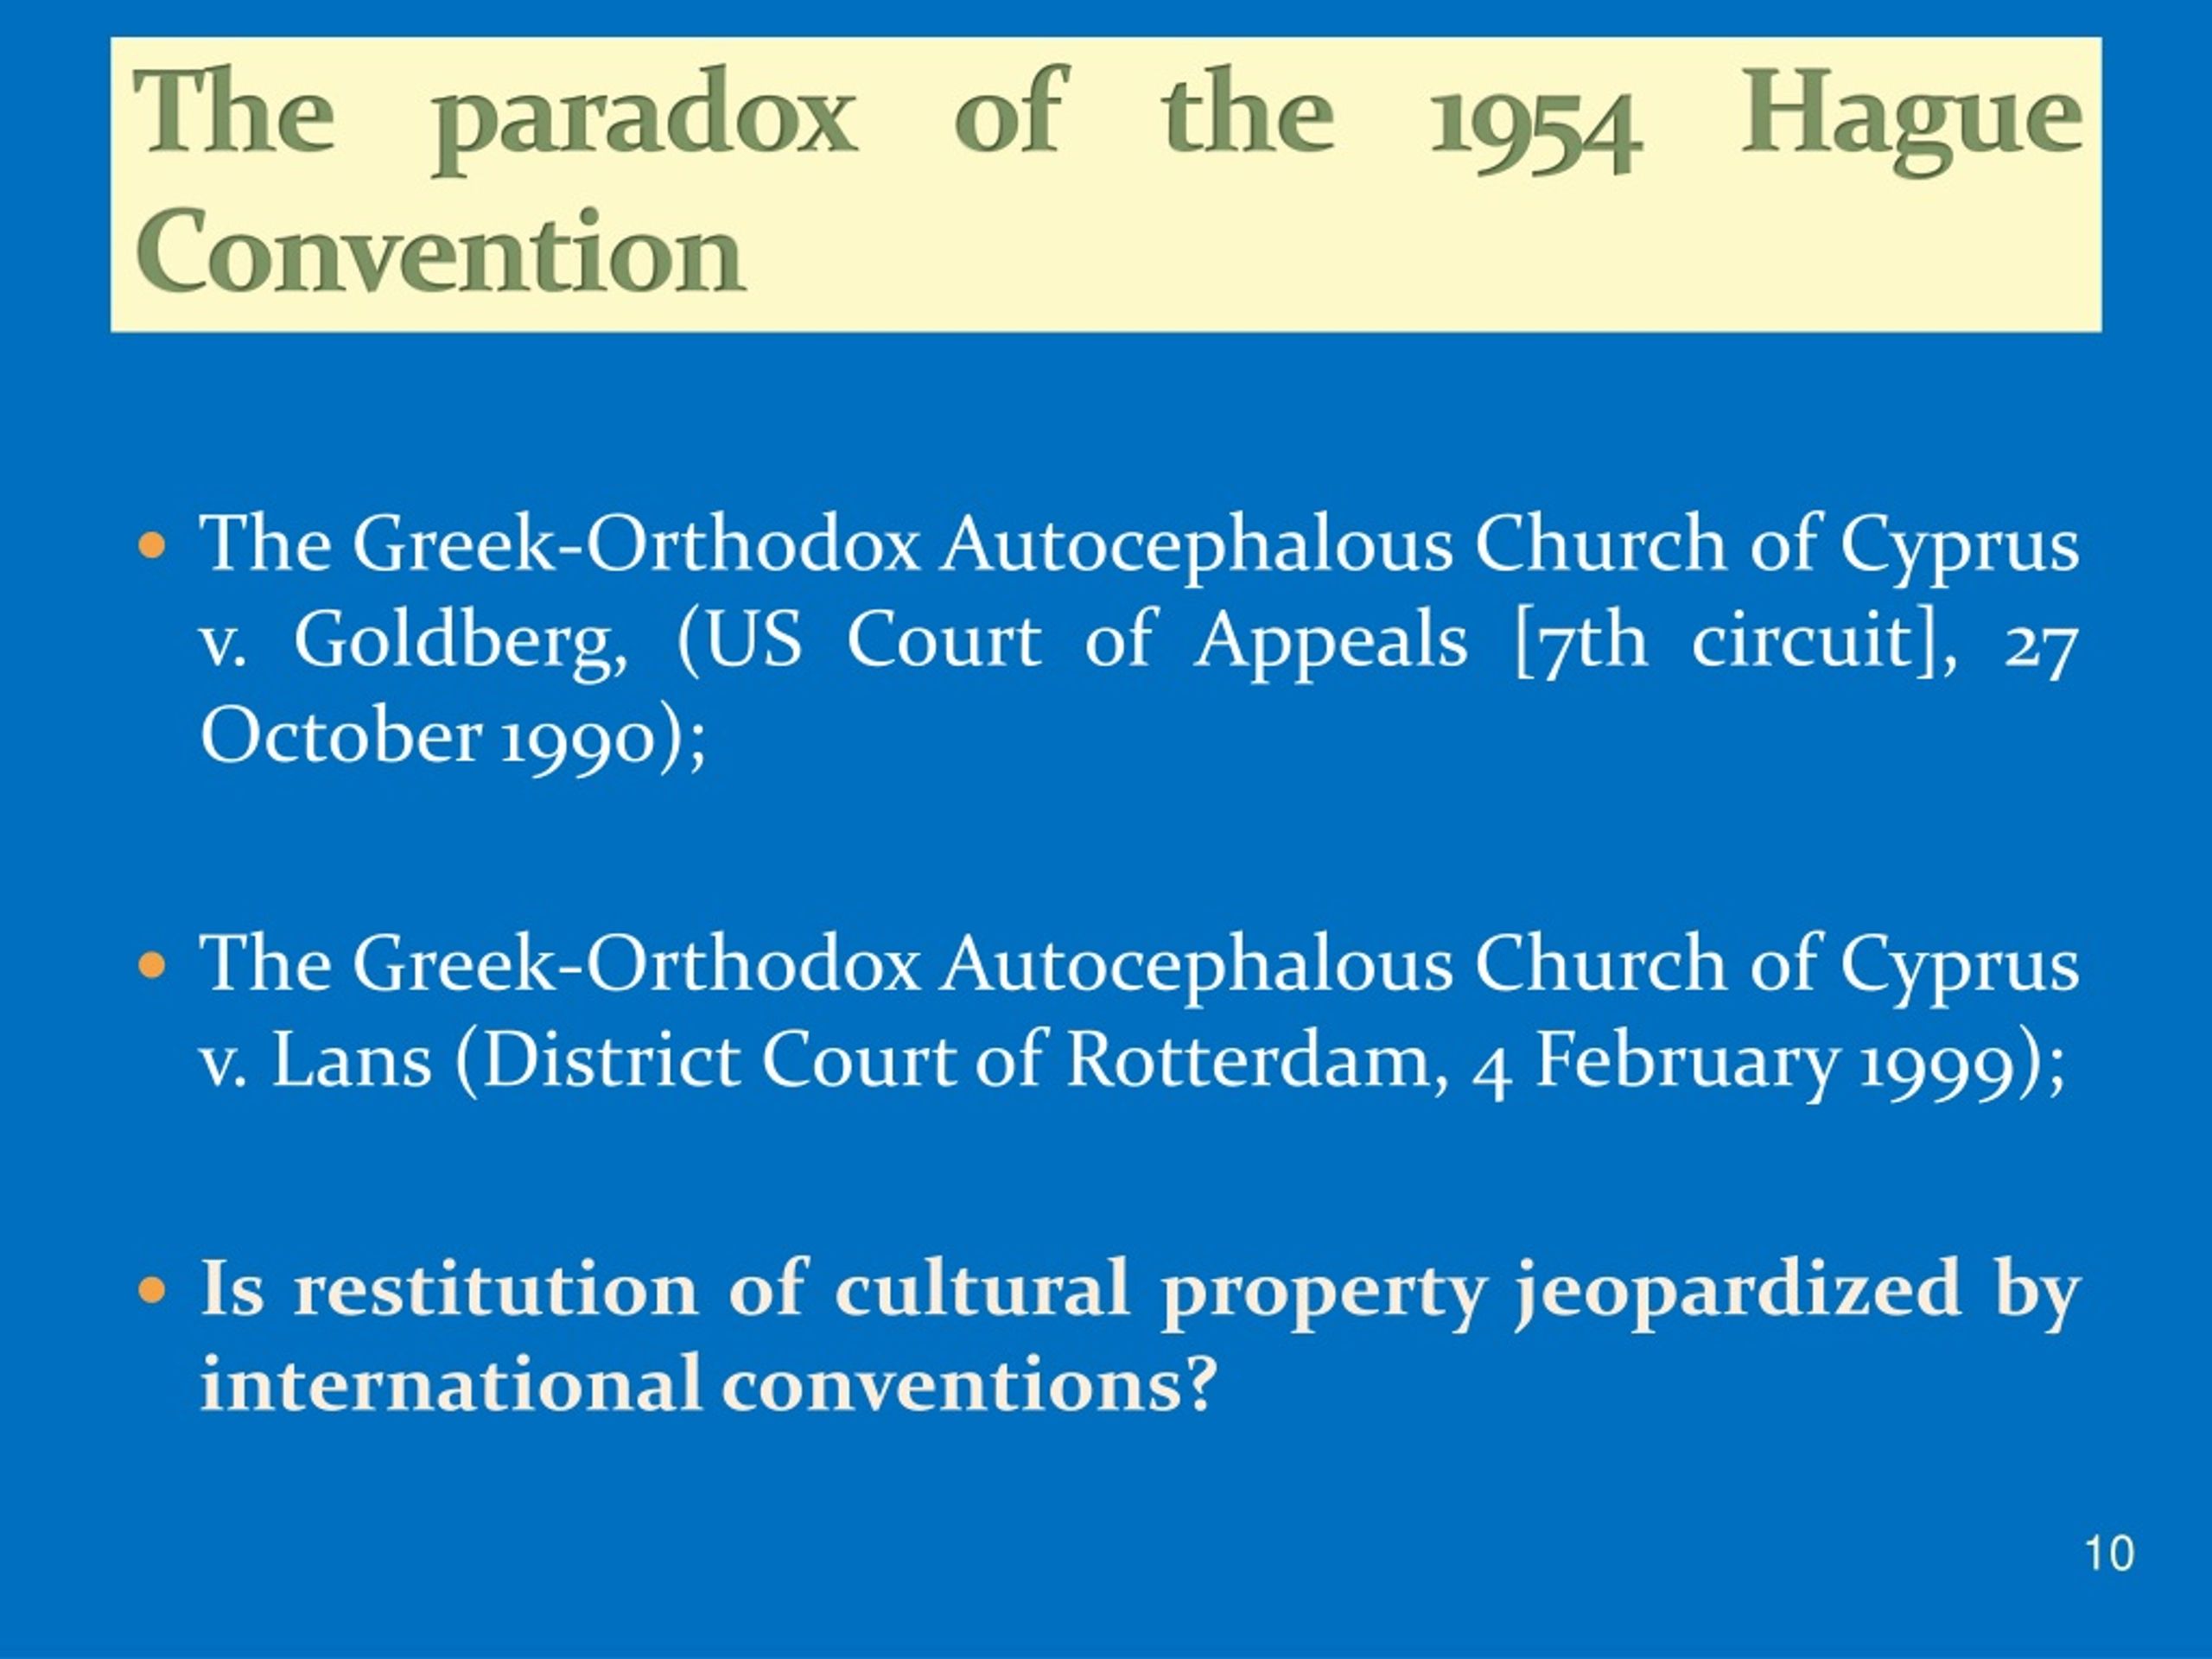 The Hague Convention of 1954 for the Protection of Cultural Property in the Event of Armed Conflict